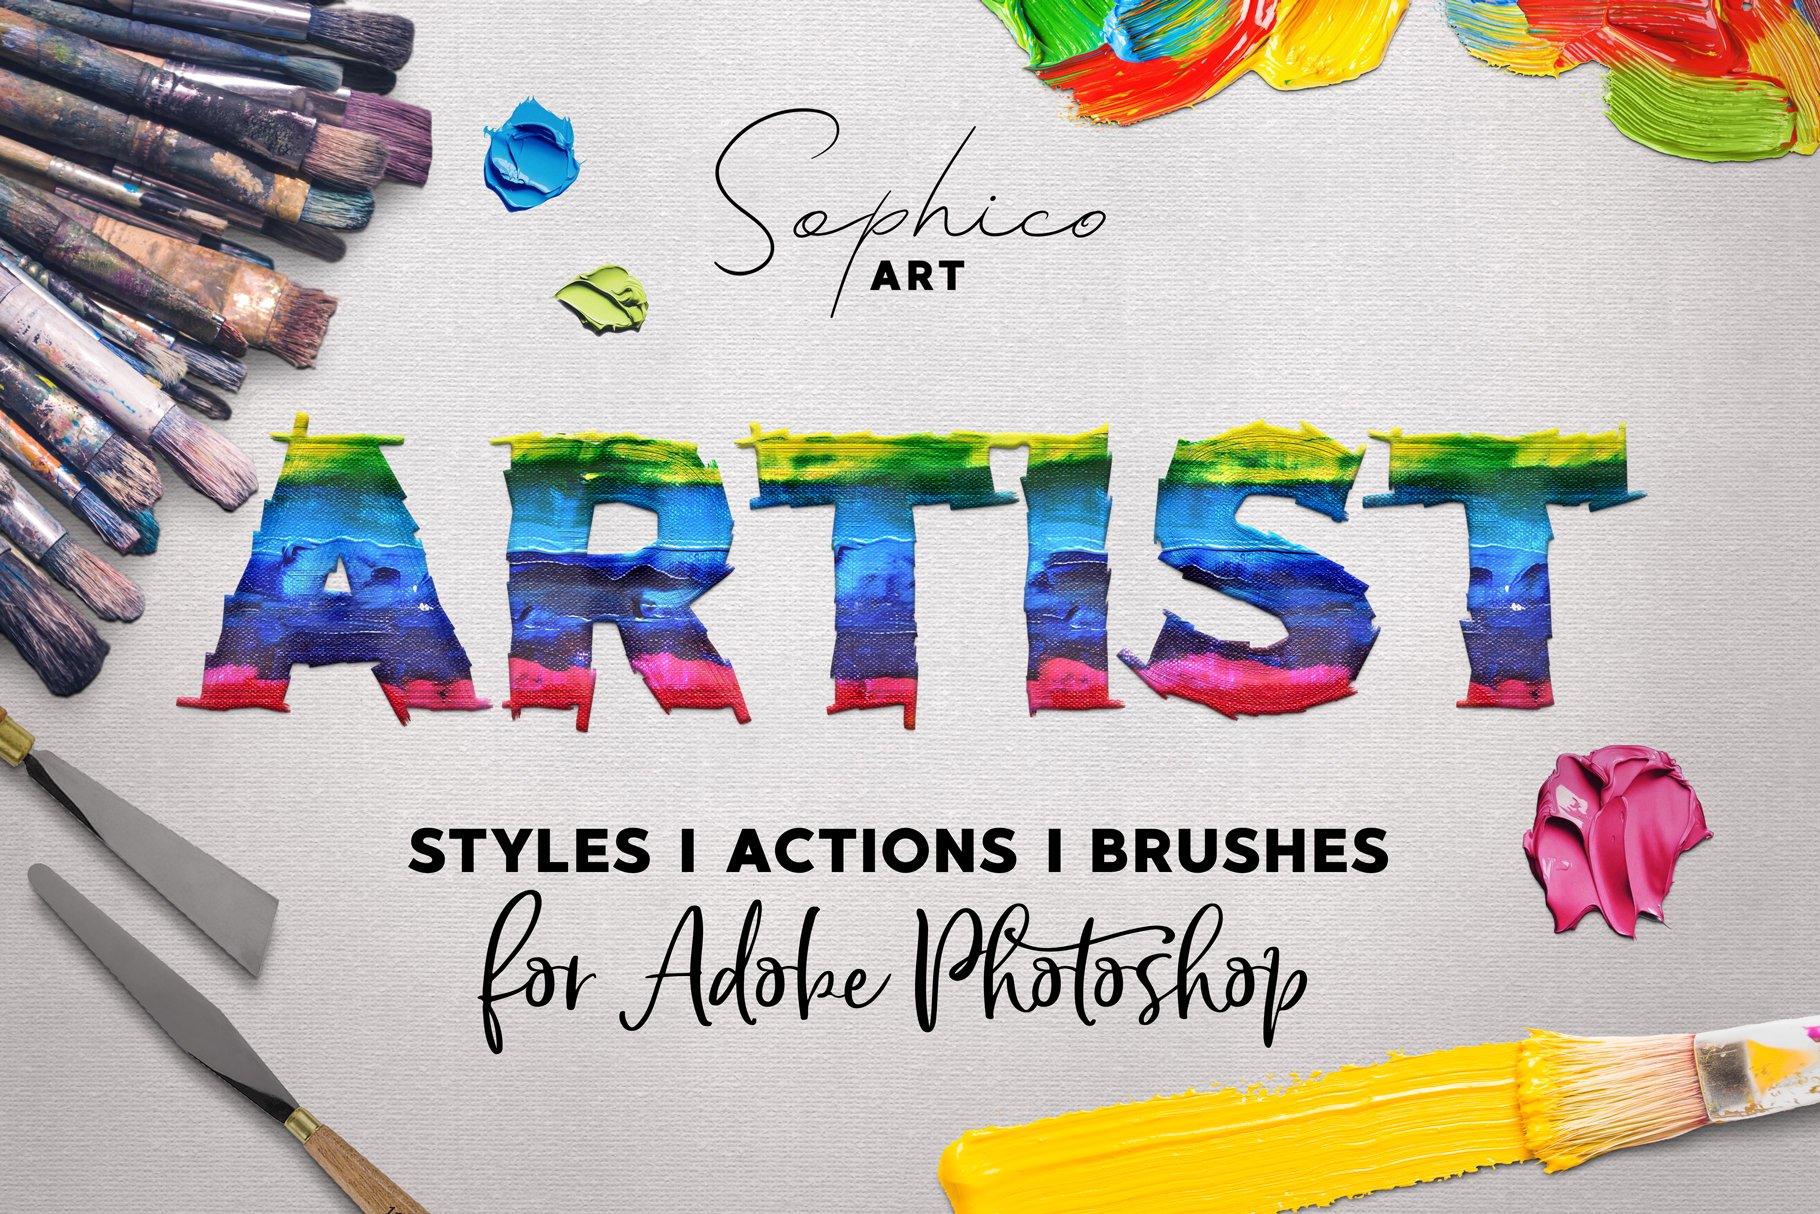 Artist Styles Actions Brushes Setcover image.